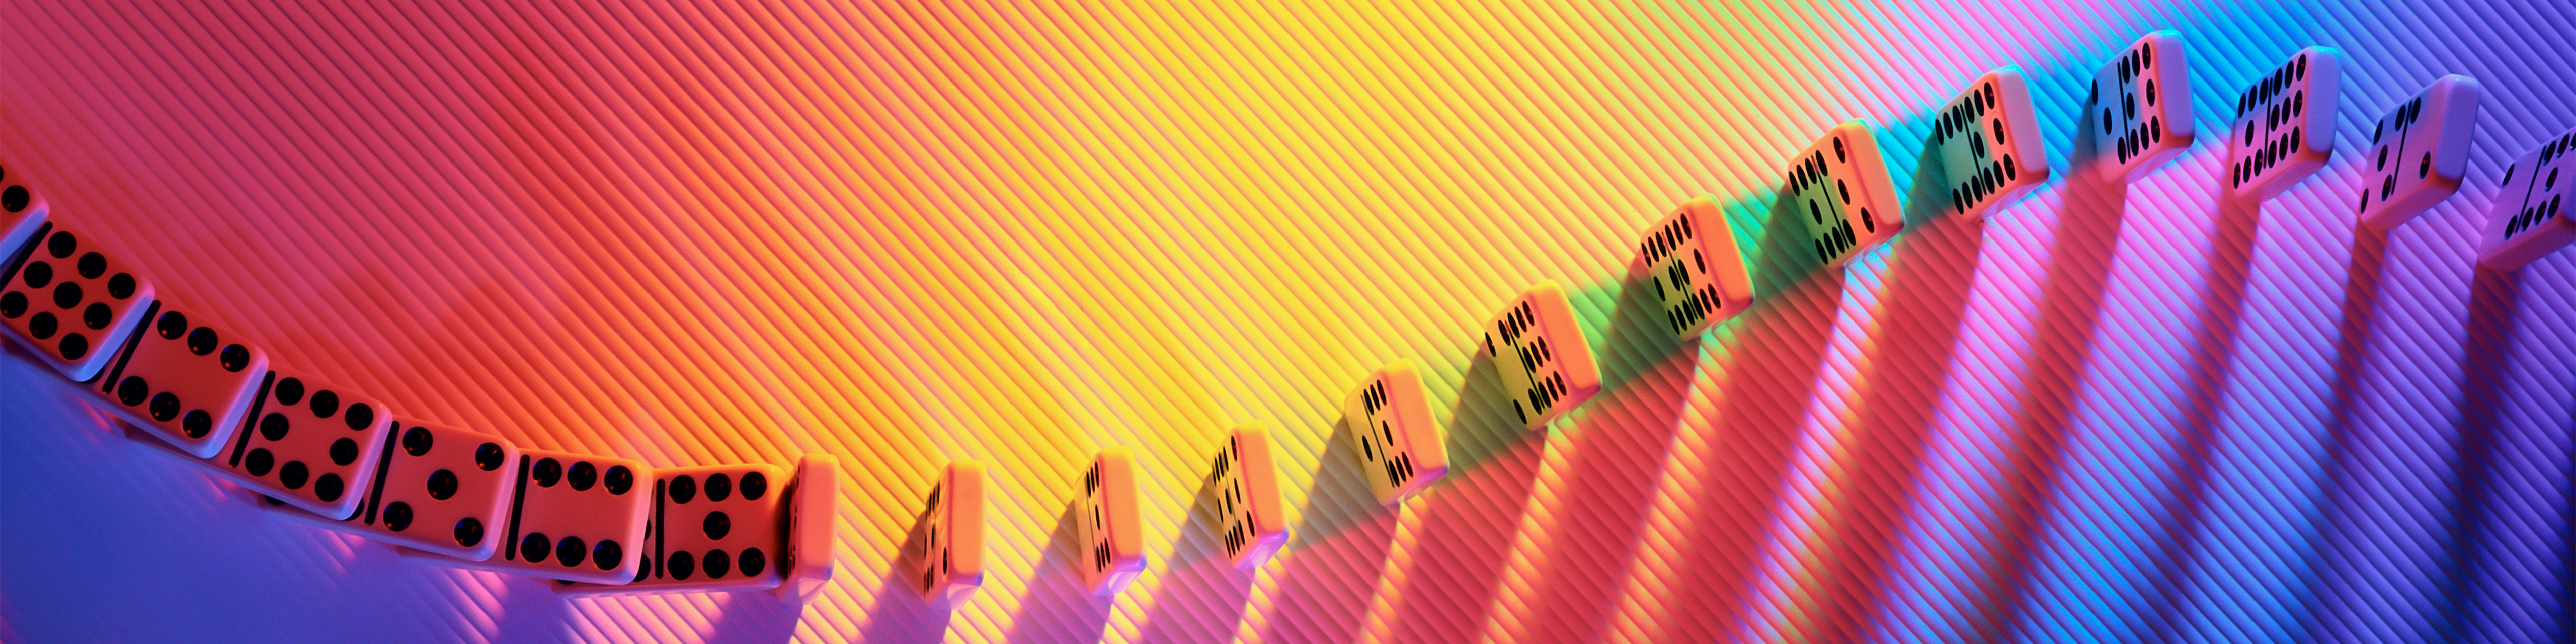 Row of dominos twisting and turning on a rainbow-colored floor